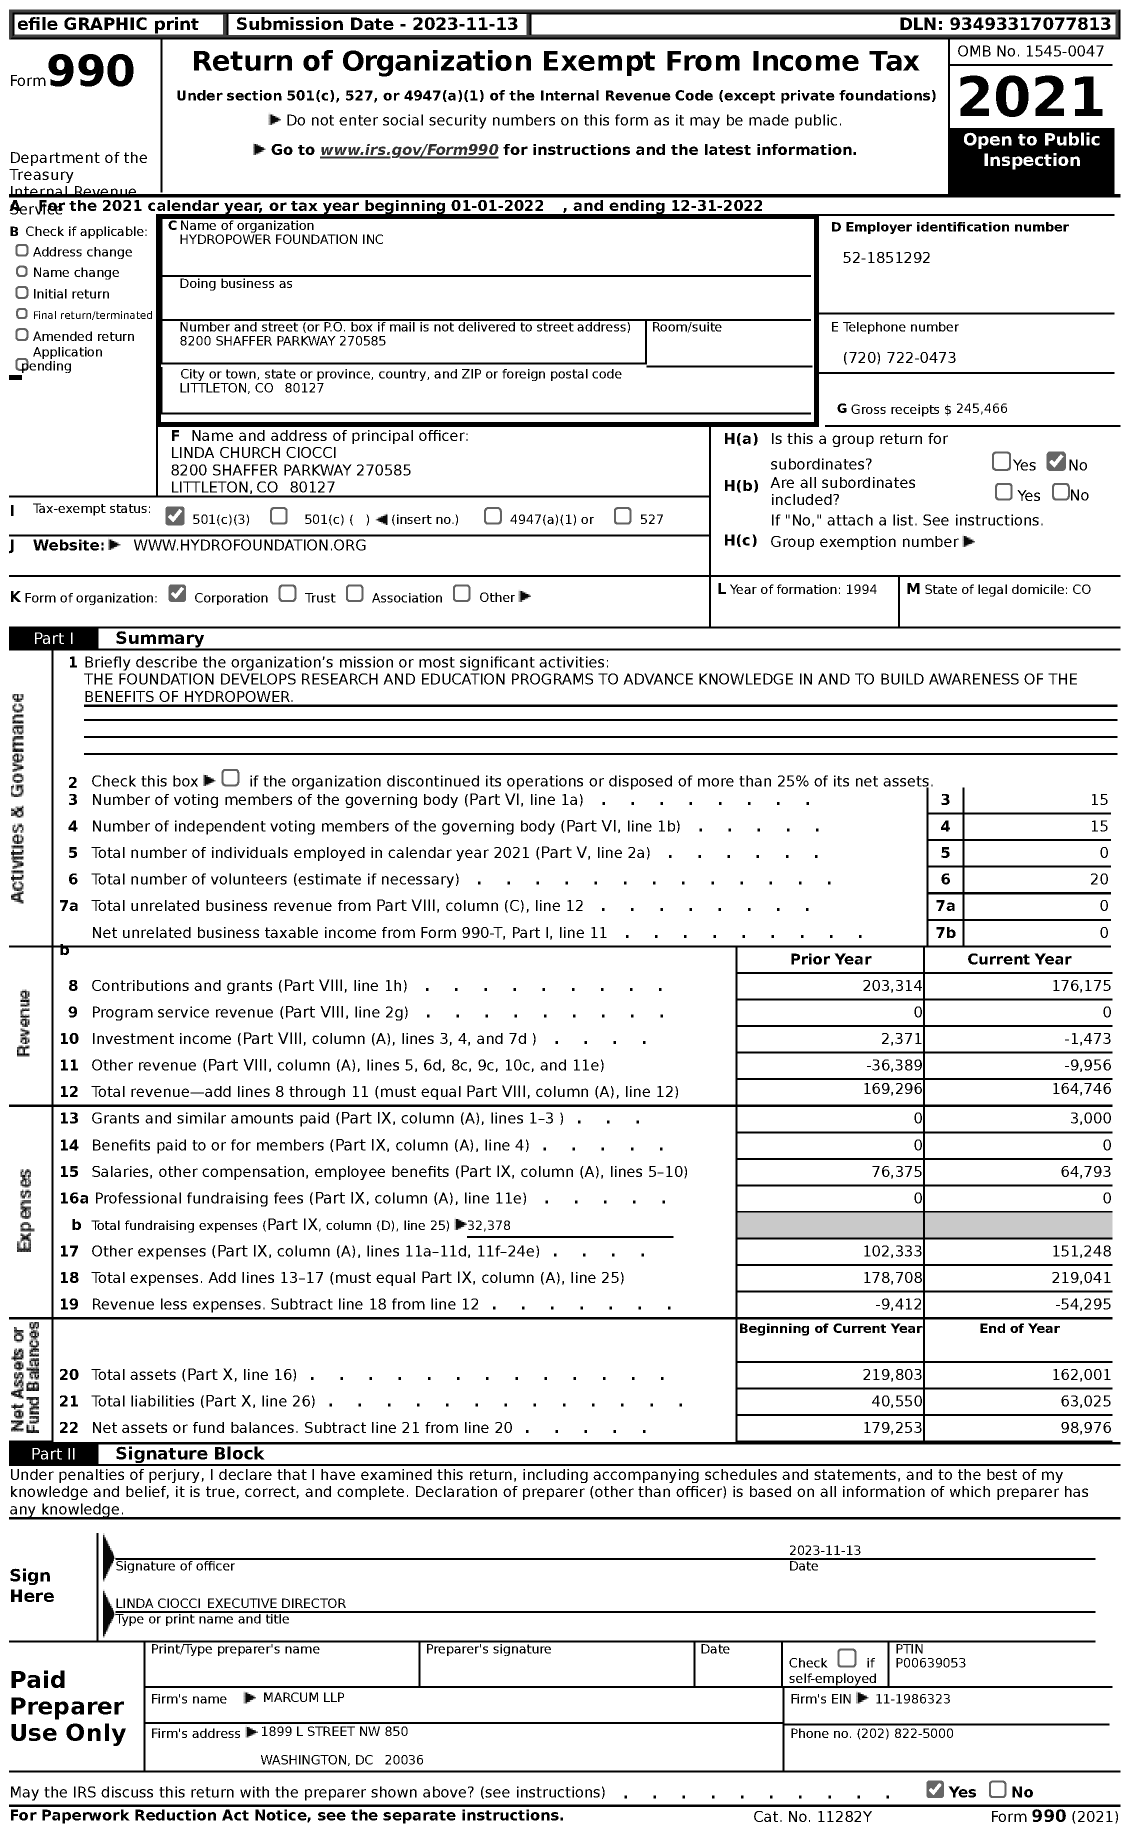 Image of first page of 2022 Form 990 for Hydropower Foundation (HRF)